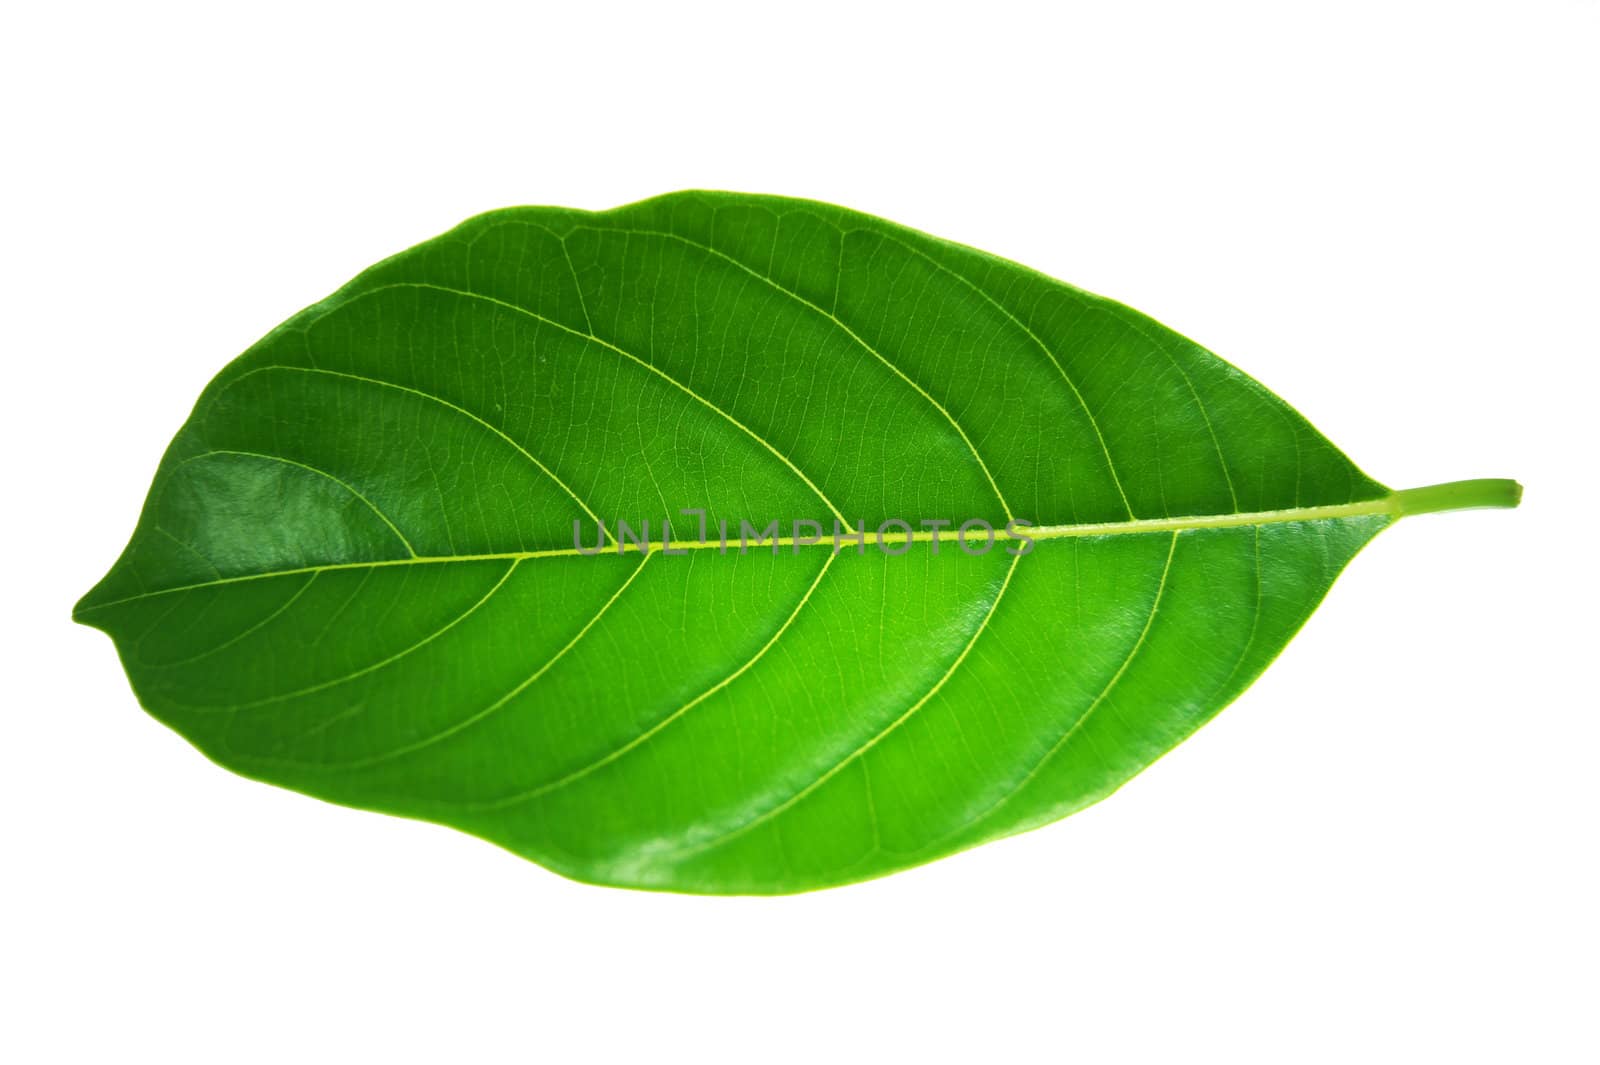 Laurel leaf isolated on white background by Noppharat_th